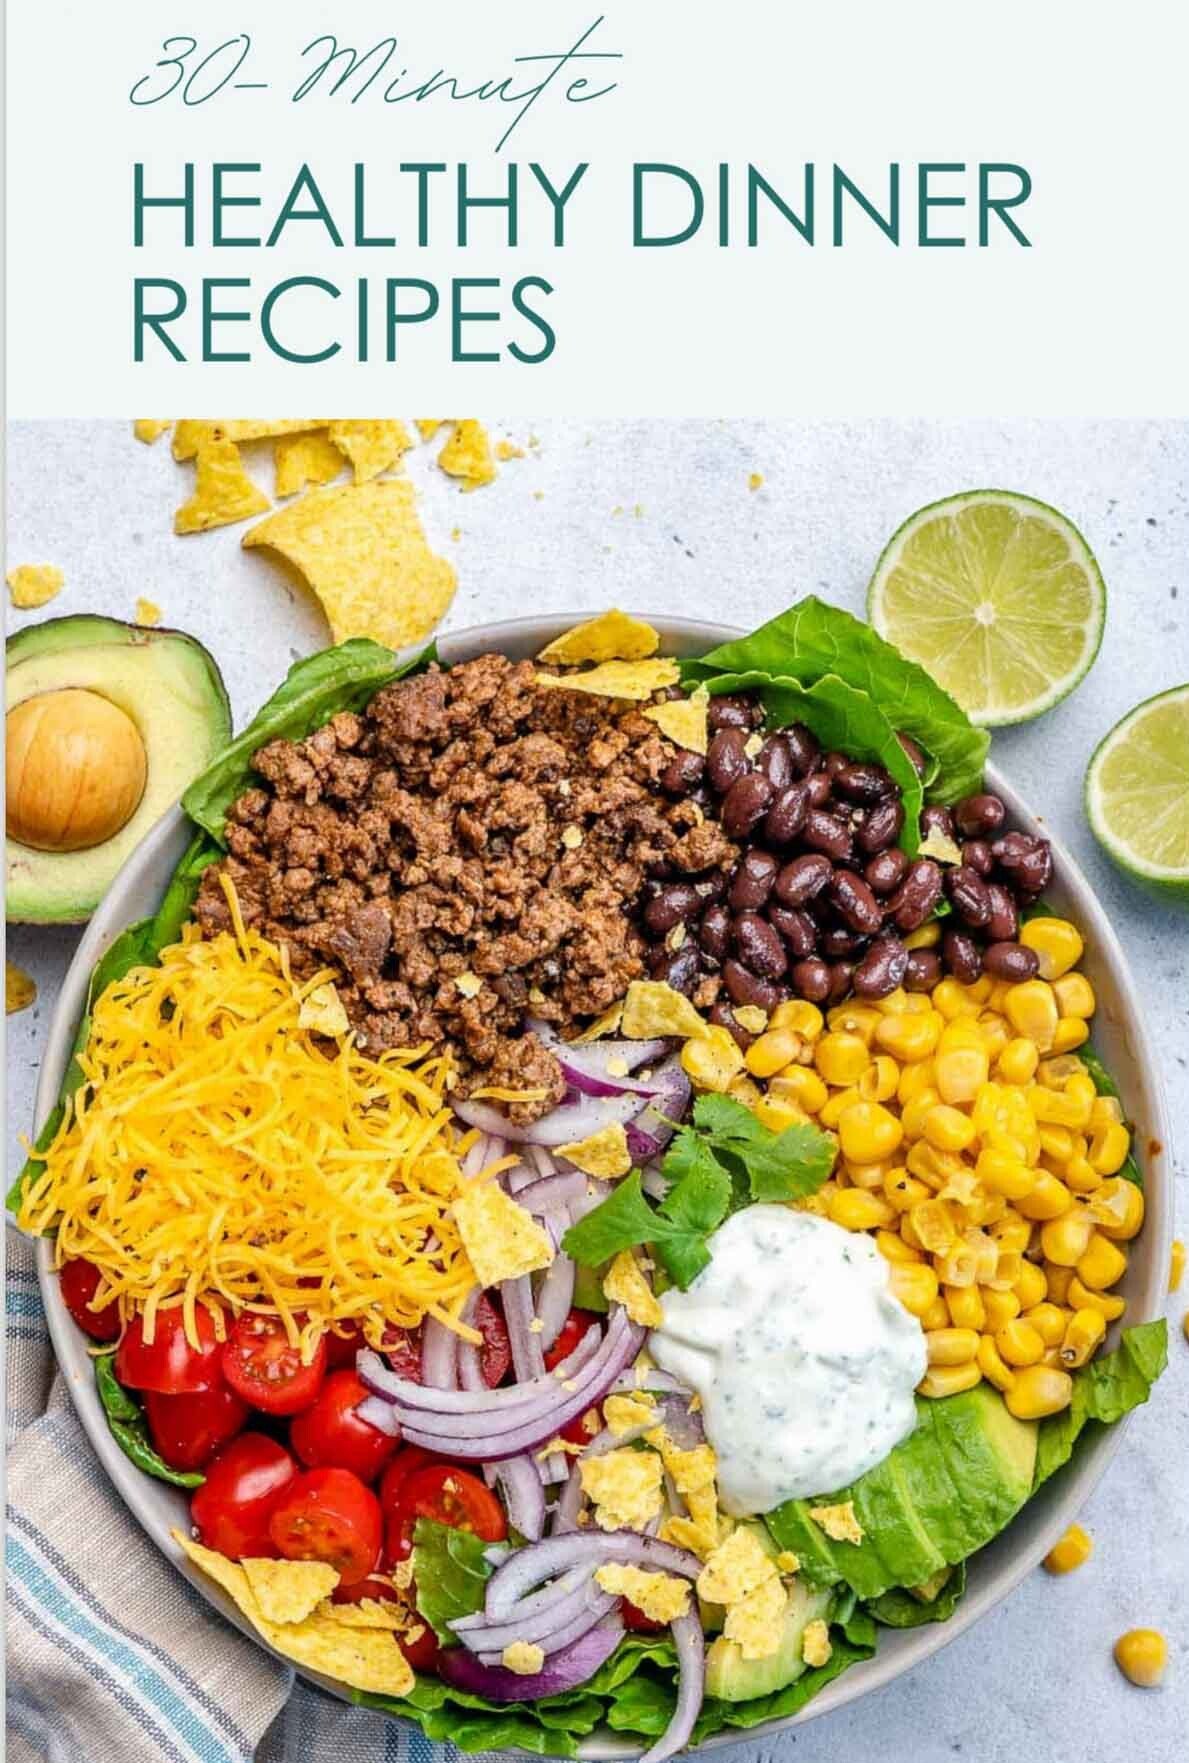 ebook cover with taco salad bowl in the image.